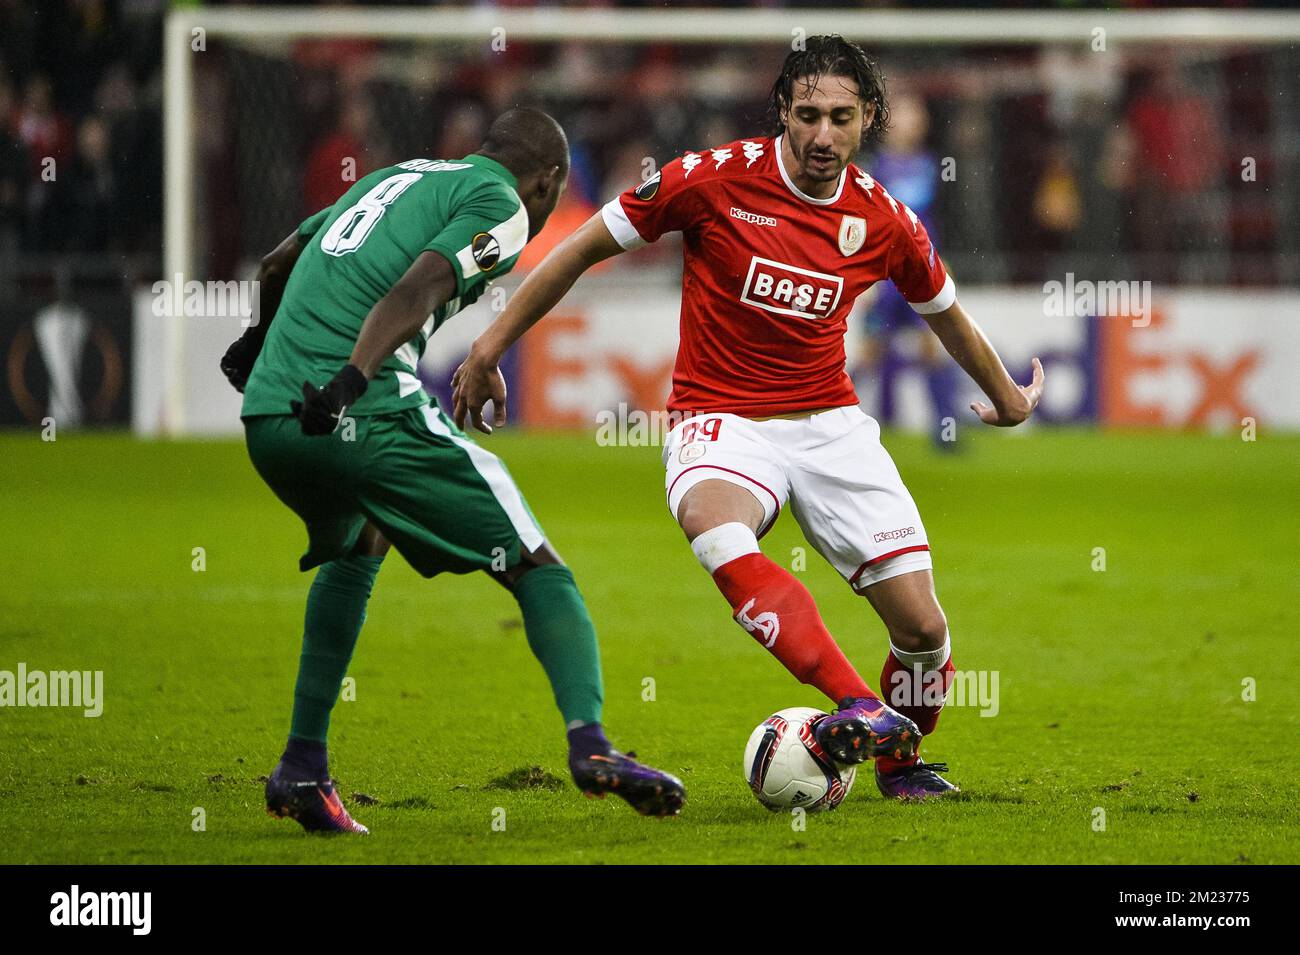 Panathinaikos' forward Victor Ibarbo and Standard's Ishak Belfodil pictured during a third game of the group stage (group G) of the Europa League competition between Belgian soccer team Standard de Liege and Greek soccer team Panathinaikos, Thursday 20 October 2016, in Liege. BELGA PHOTO NICOLAS LAMBERT Stock Photo